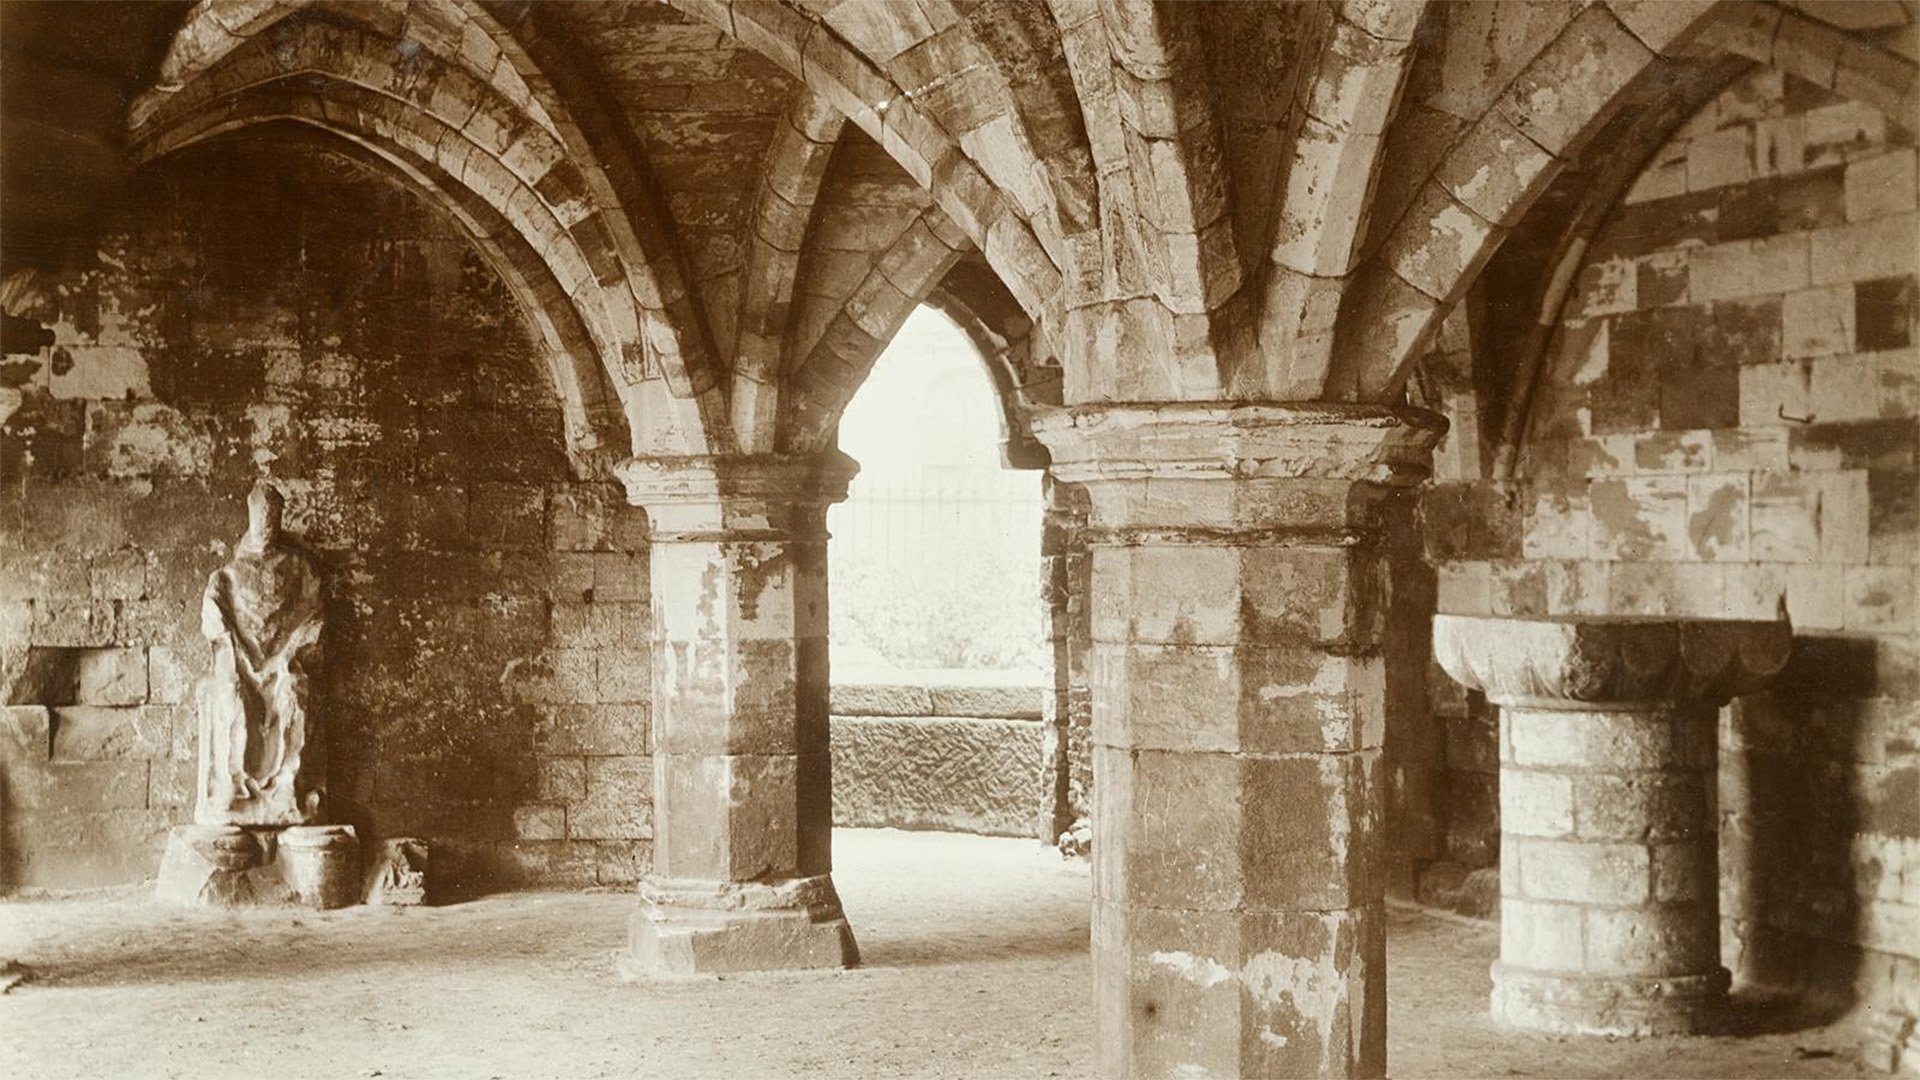 A view of the undercroft of St Leonard's Hospital, York with a statue of a seated figure adjacent to the wall